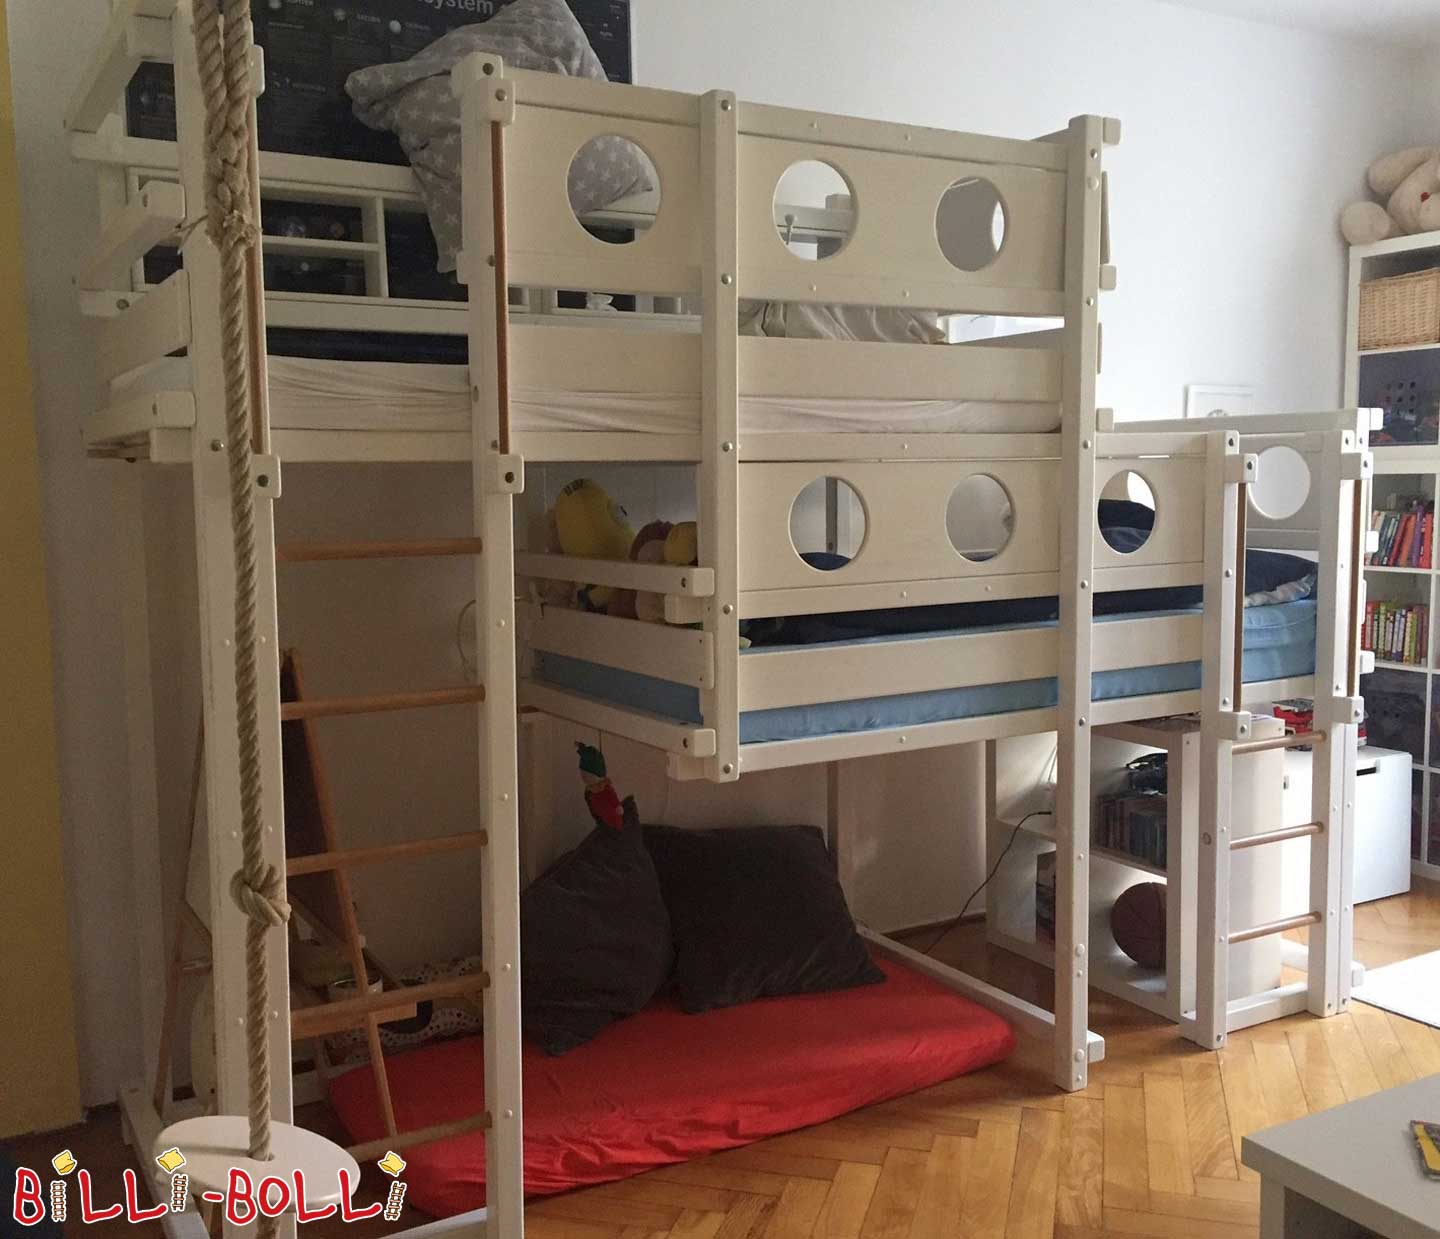 Both-top bed type 2B, 90 x 200 cm, white lacquered pine (Category: second hand kids’ furniture)